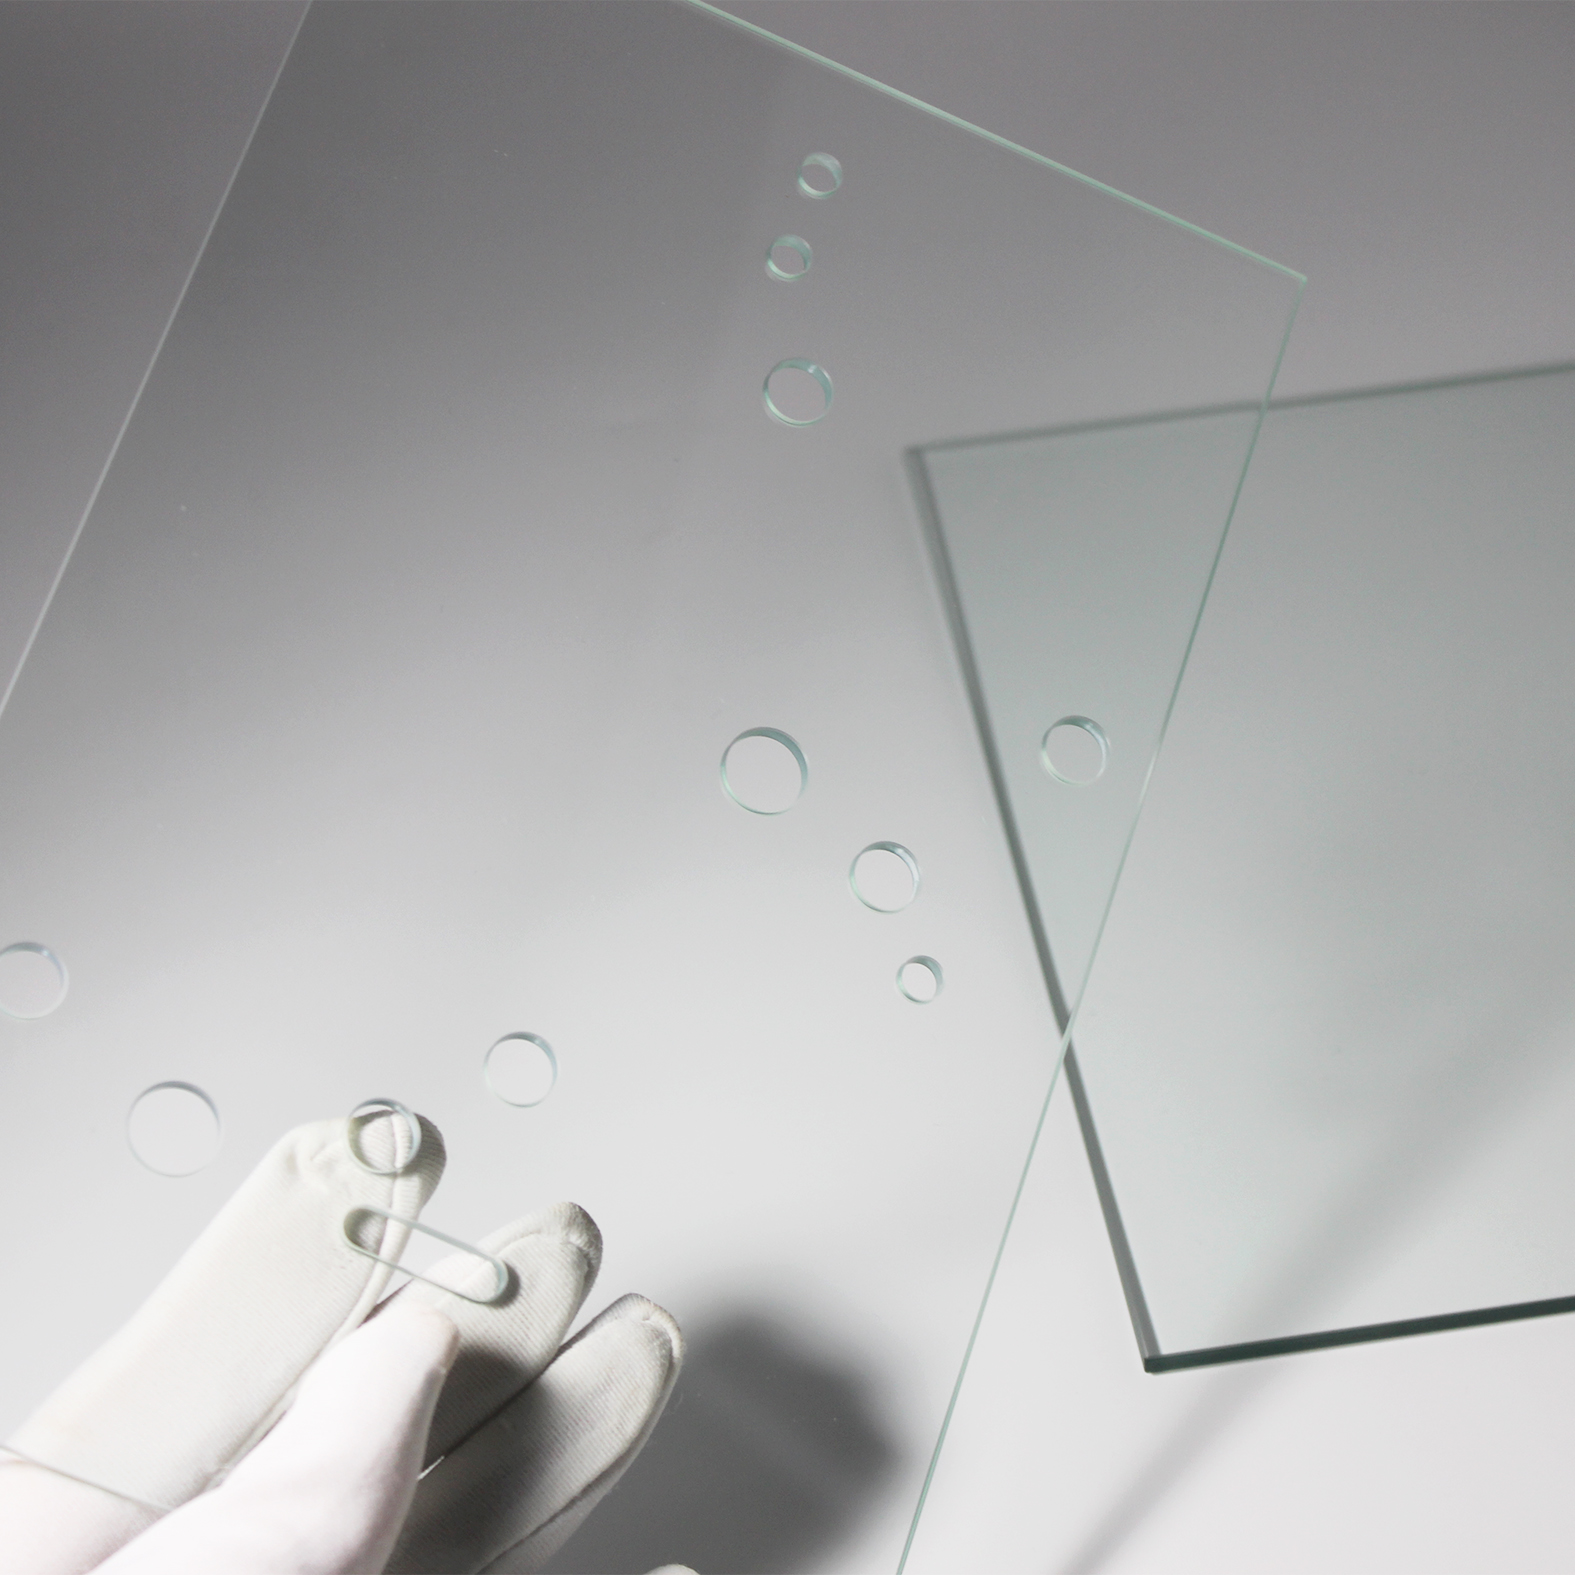 China Supplier Provide Customized Holes Optical Glass Flat